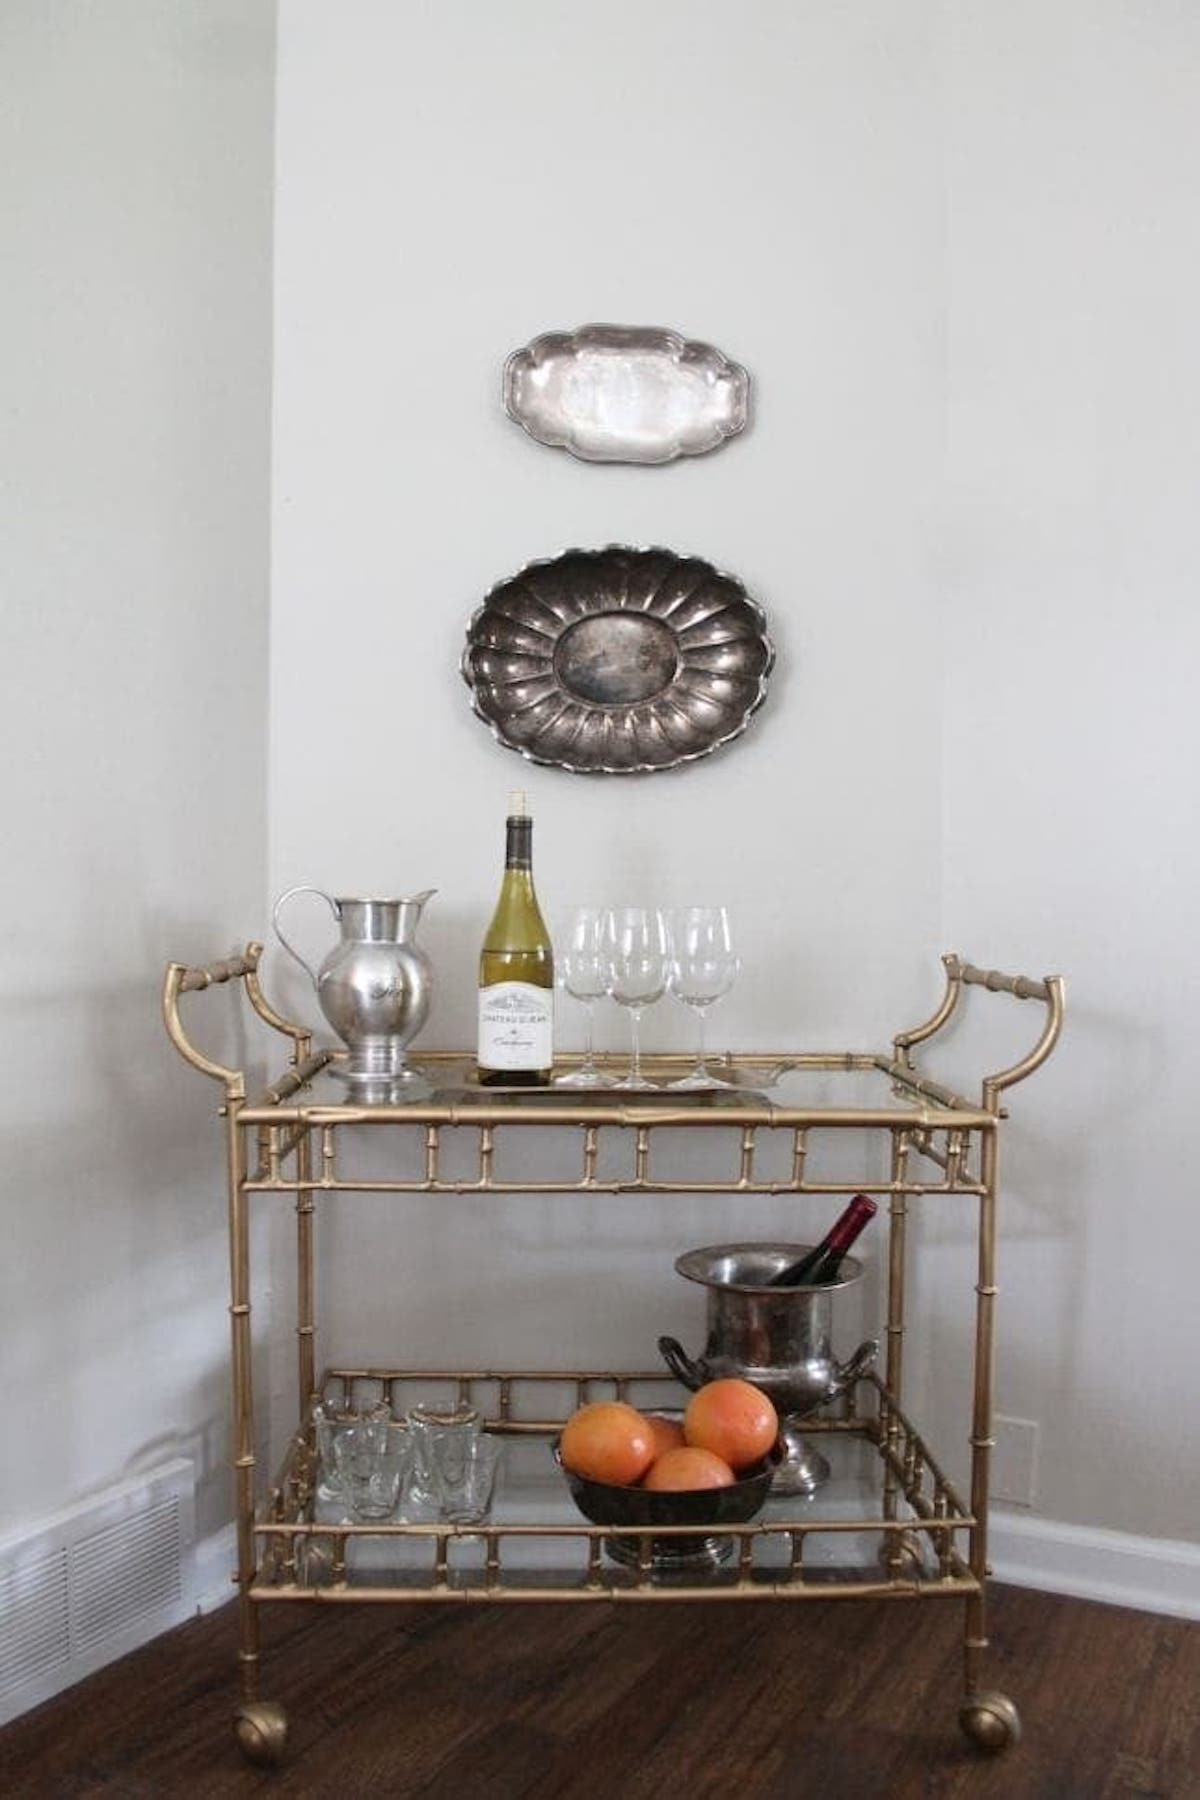 A brass bar cart with two shelves holds a wine bottle, four glasses, a pitcher, a bowl of oranges, and an ice bucket with a bottle inside. Two silver trays are mounted on the wall above it, beautifully contrasting with the Sherwin Williams Accessible Beige paint on the walls.